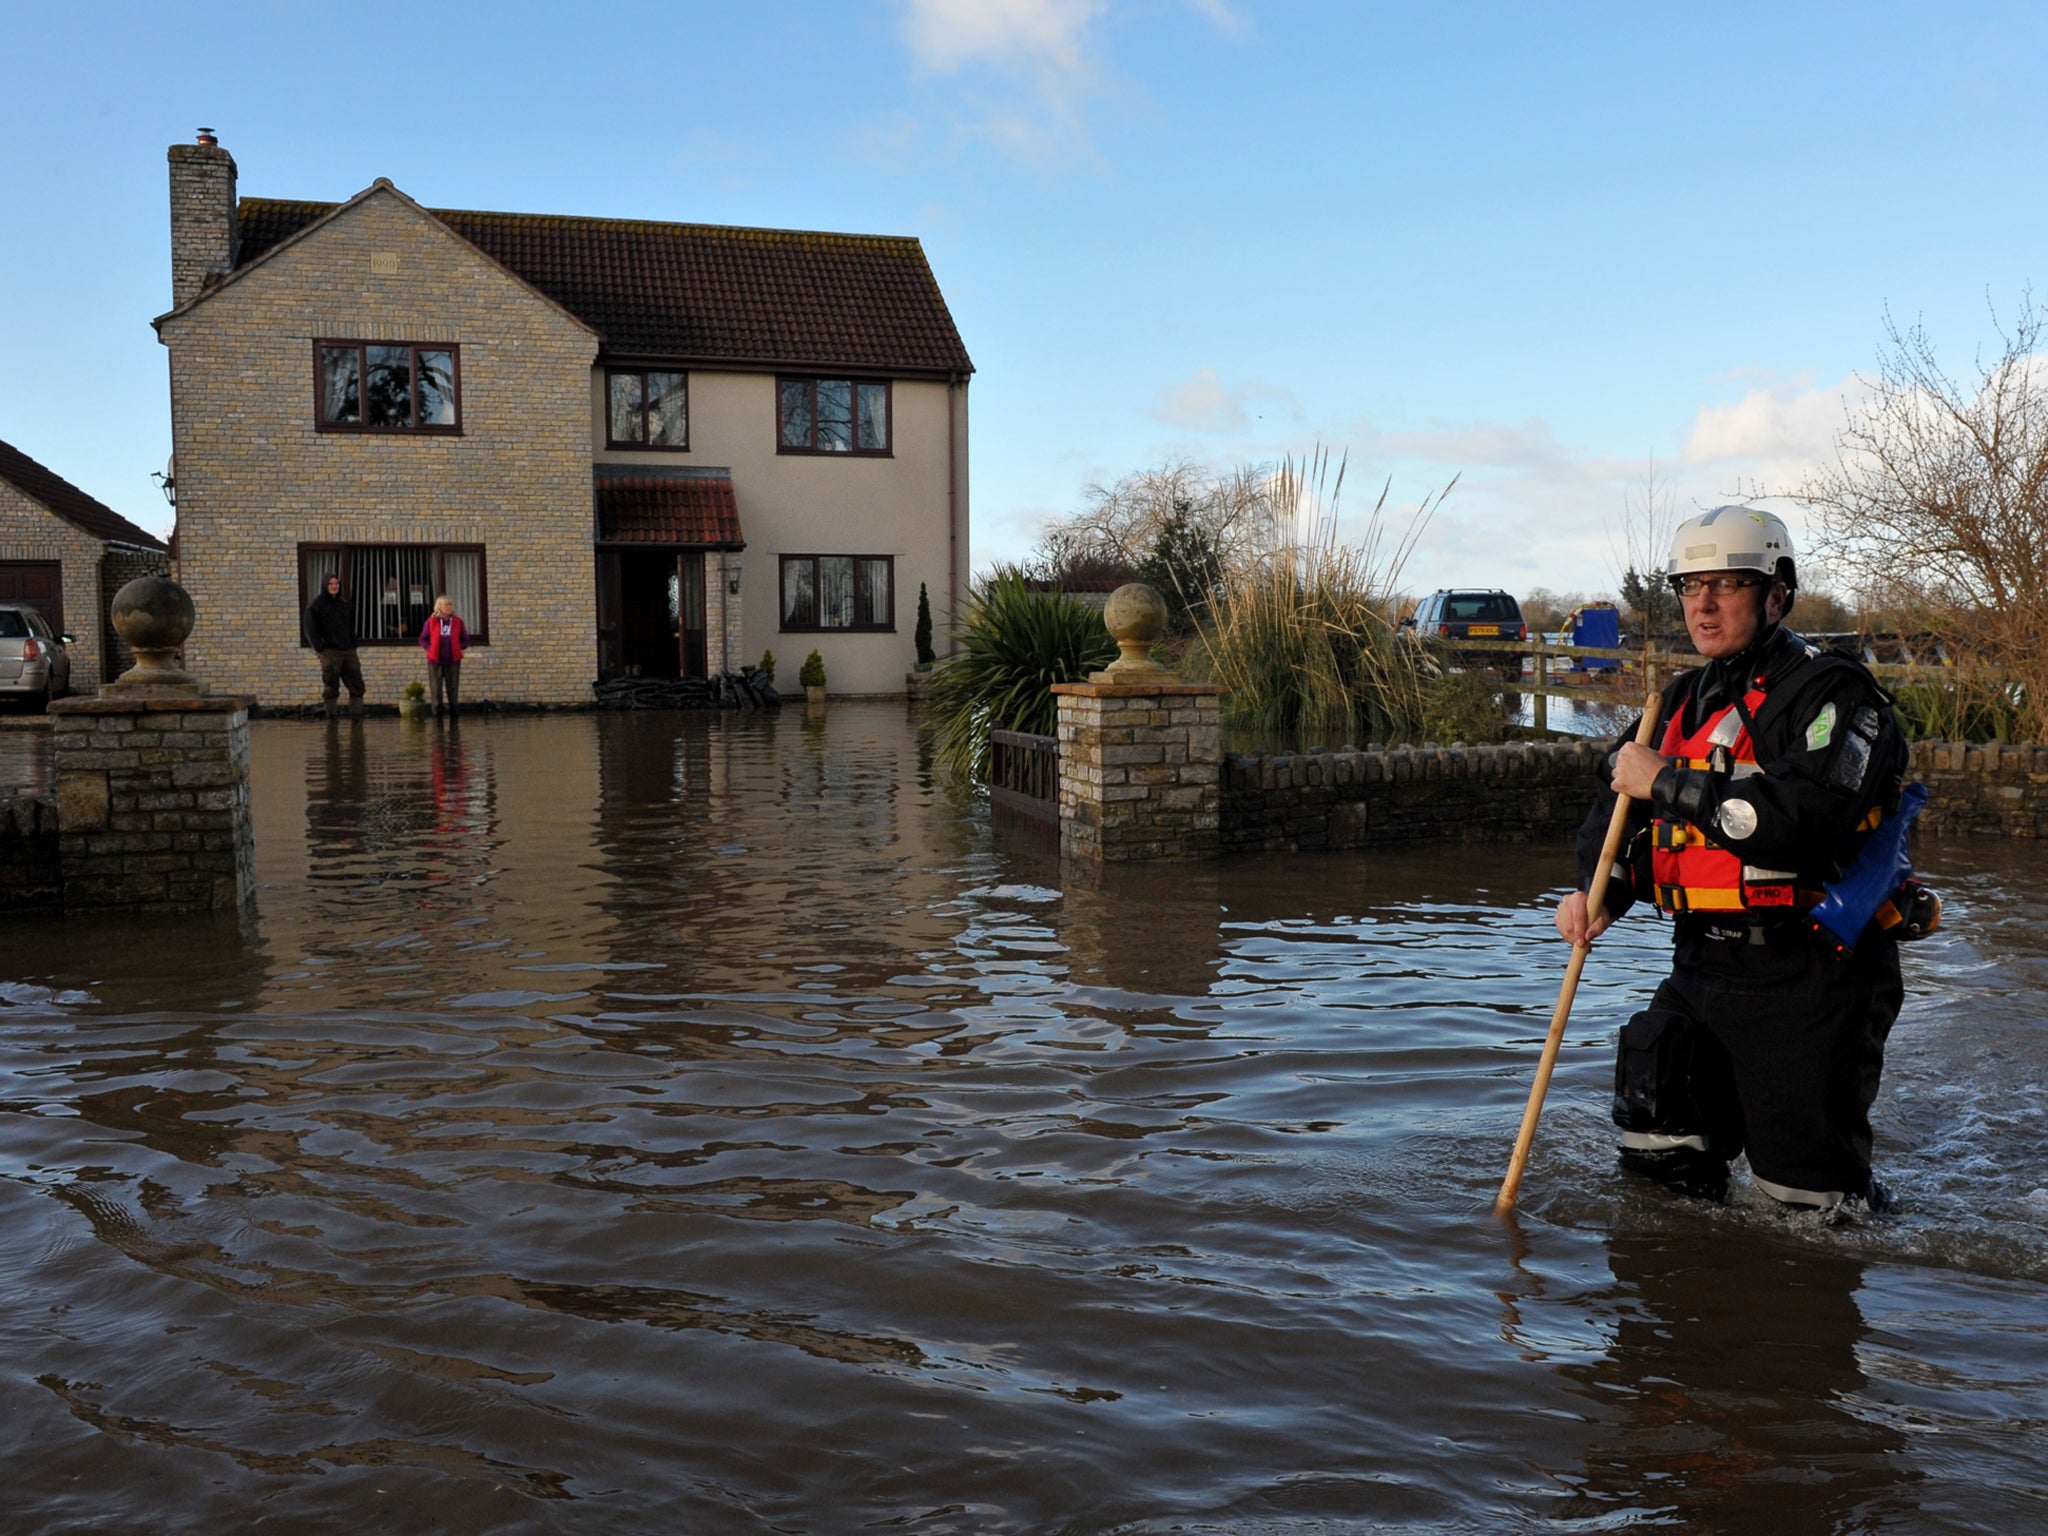 An emergency worker walks down the road outside a property in Moorland, Somerset, after residents were advised to evacuate after flood defences were breached overnight